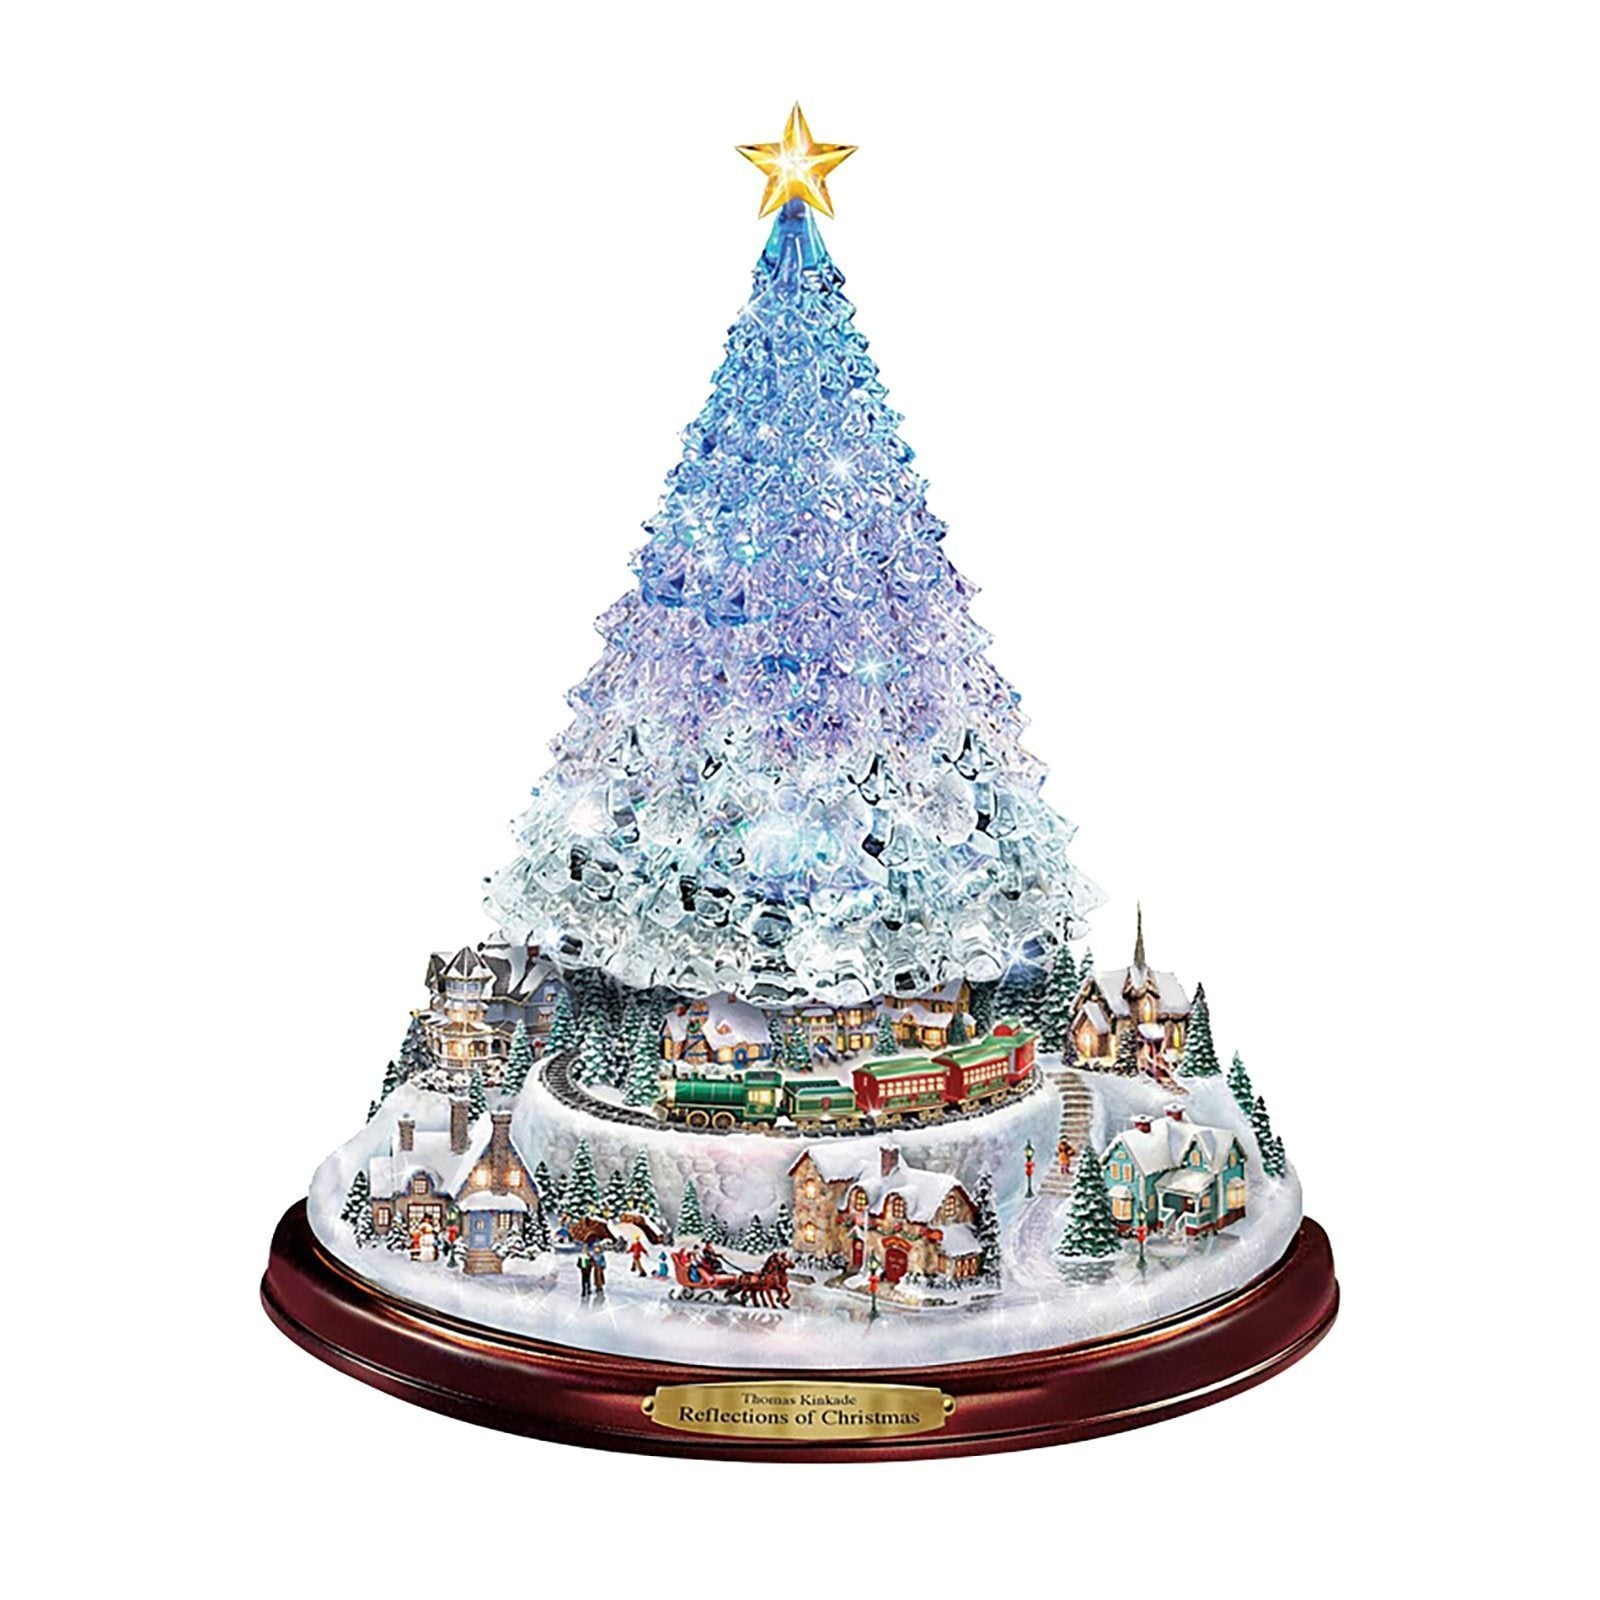 Reflections Of Christmas - Rotating Sculpture